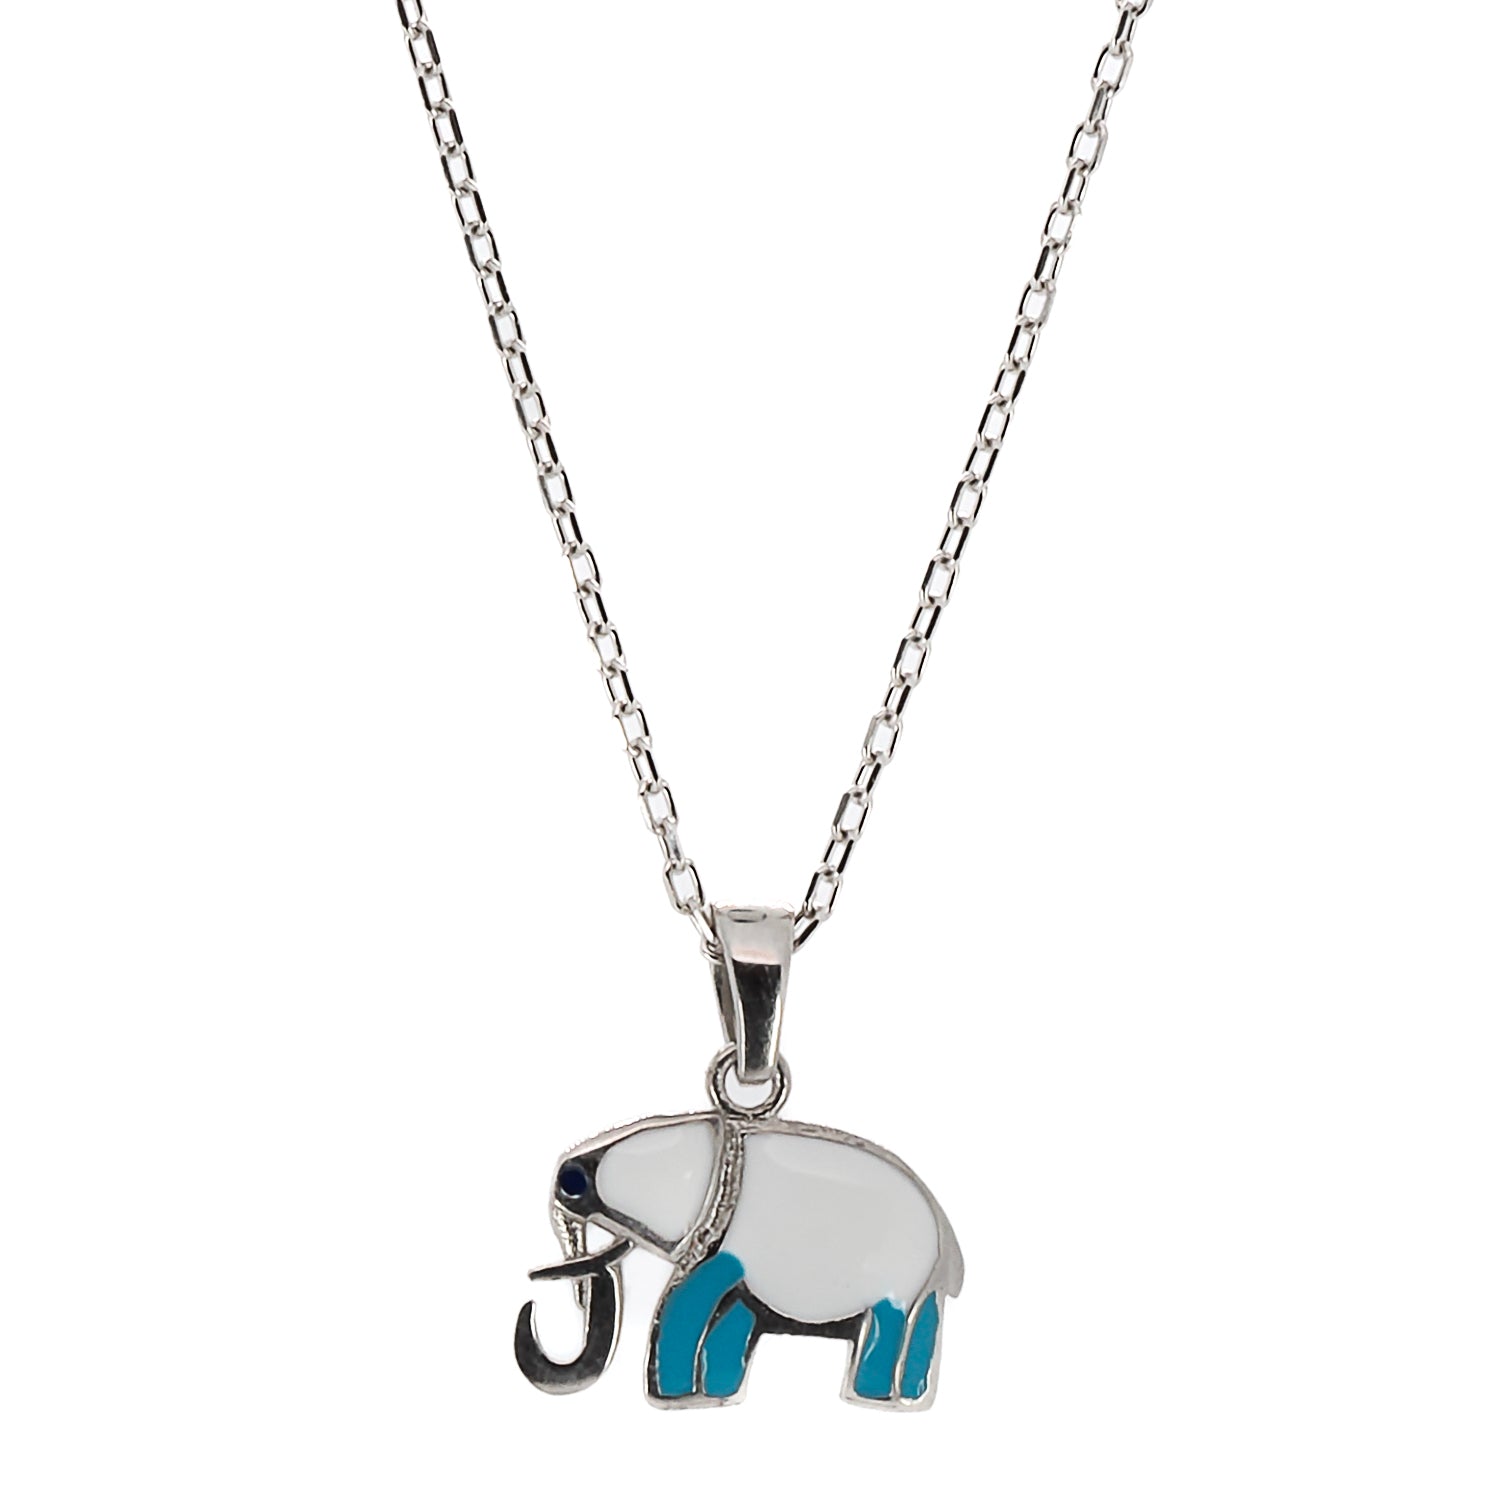 The Sterling Silver Turquoise Elephant Necklace, a stunning handmade jewelry piece featuring a lucky elephant pendant.